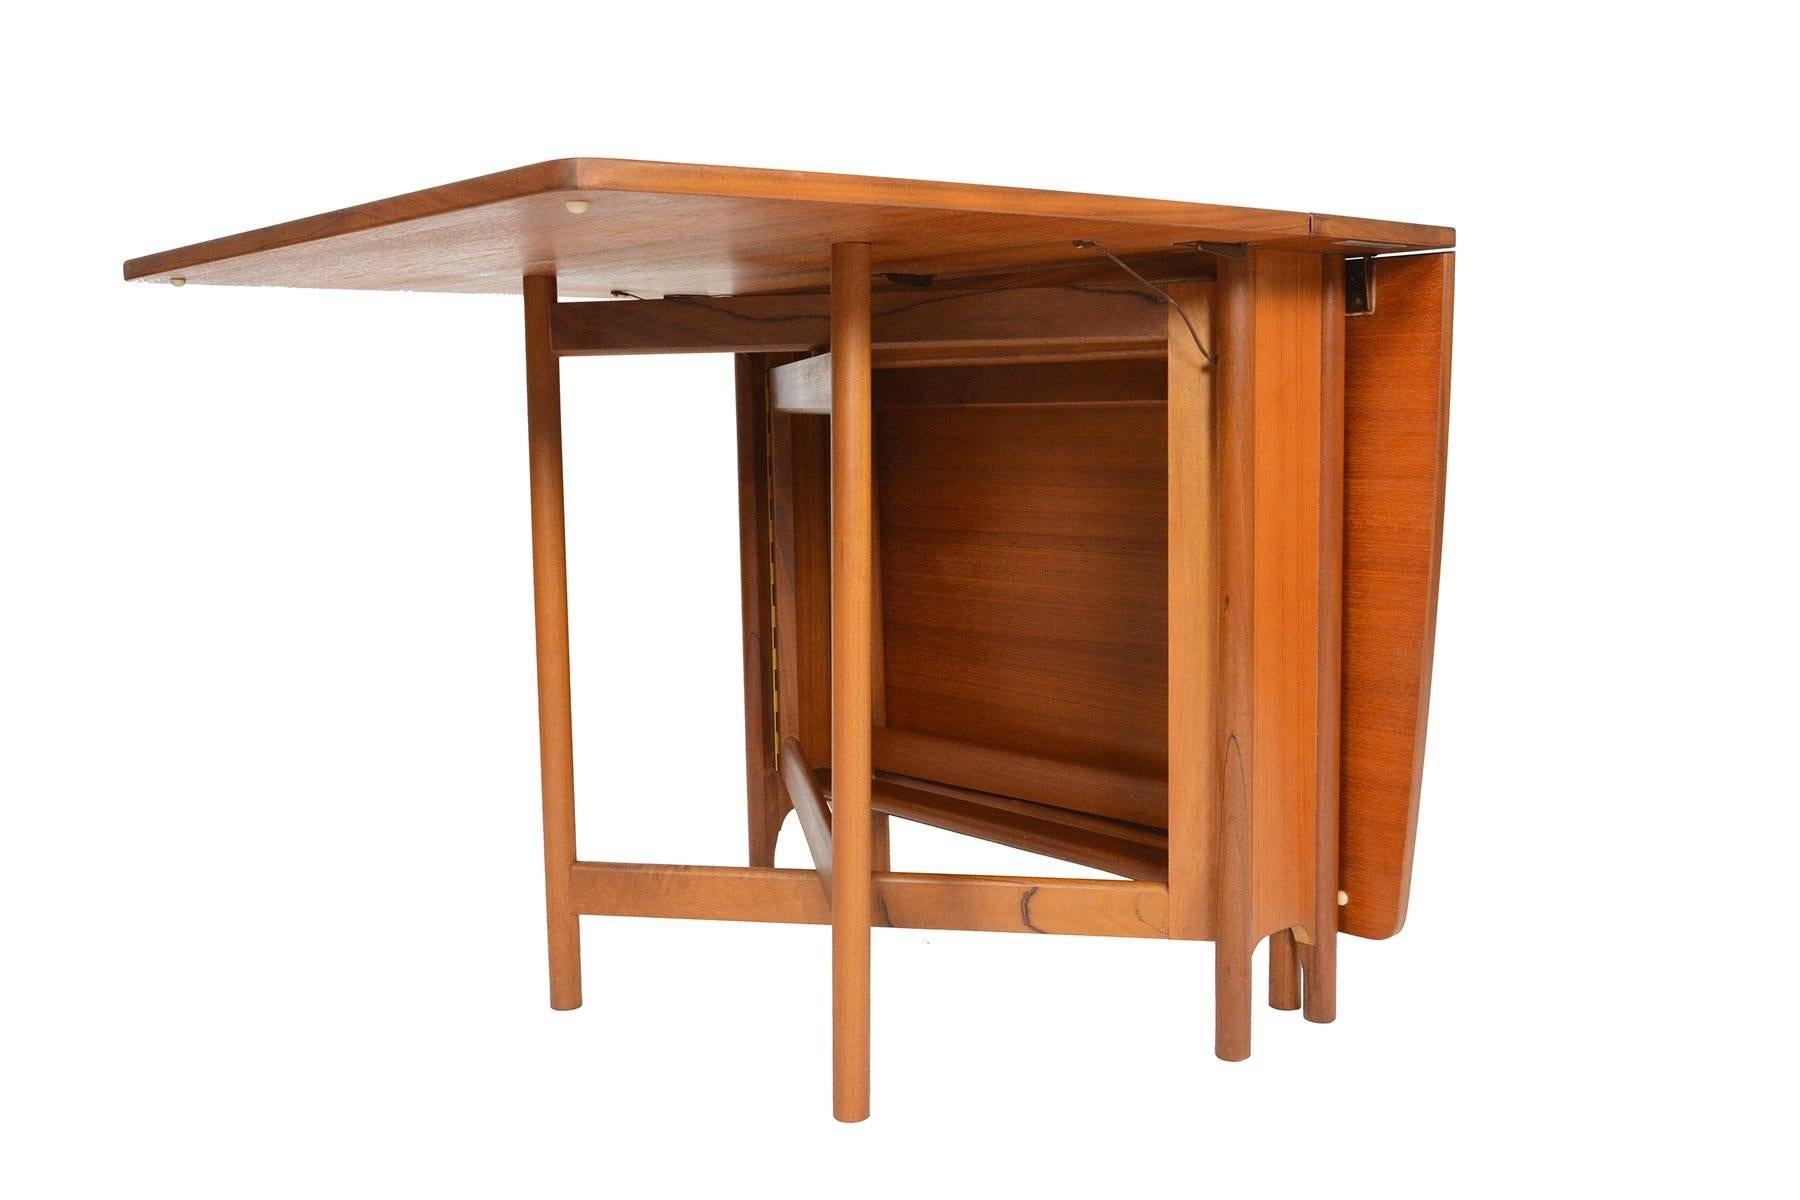 Scottish Mid-Century Modern Drop Leaf Dining Table in Teak by A.H. McIntosh